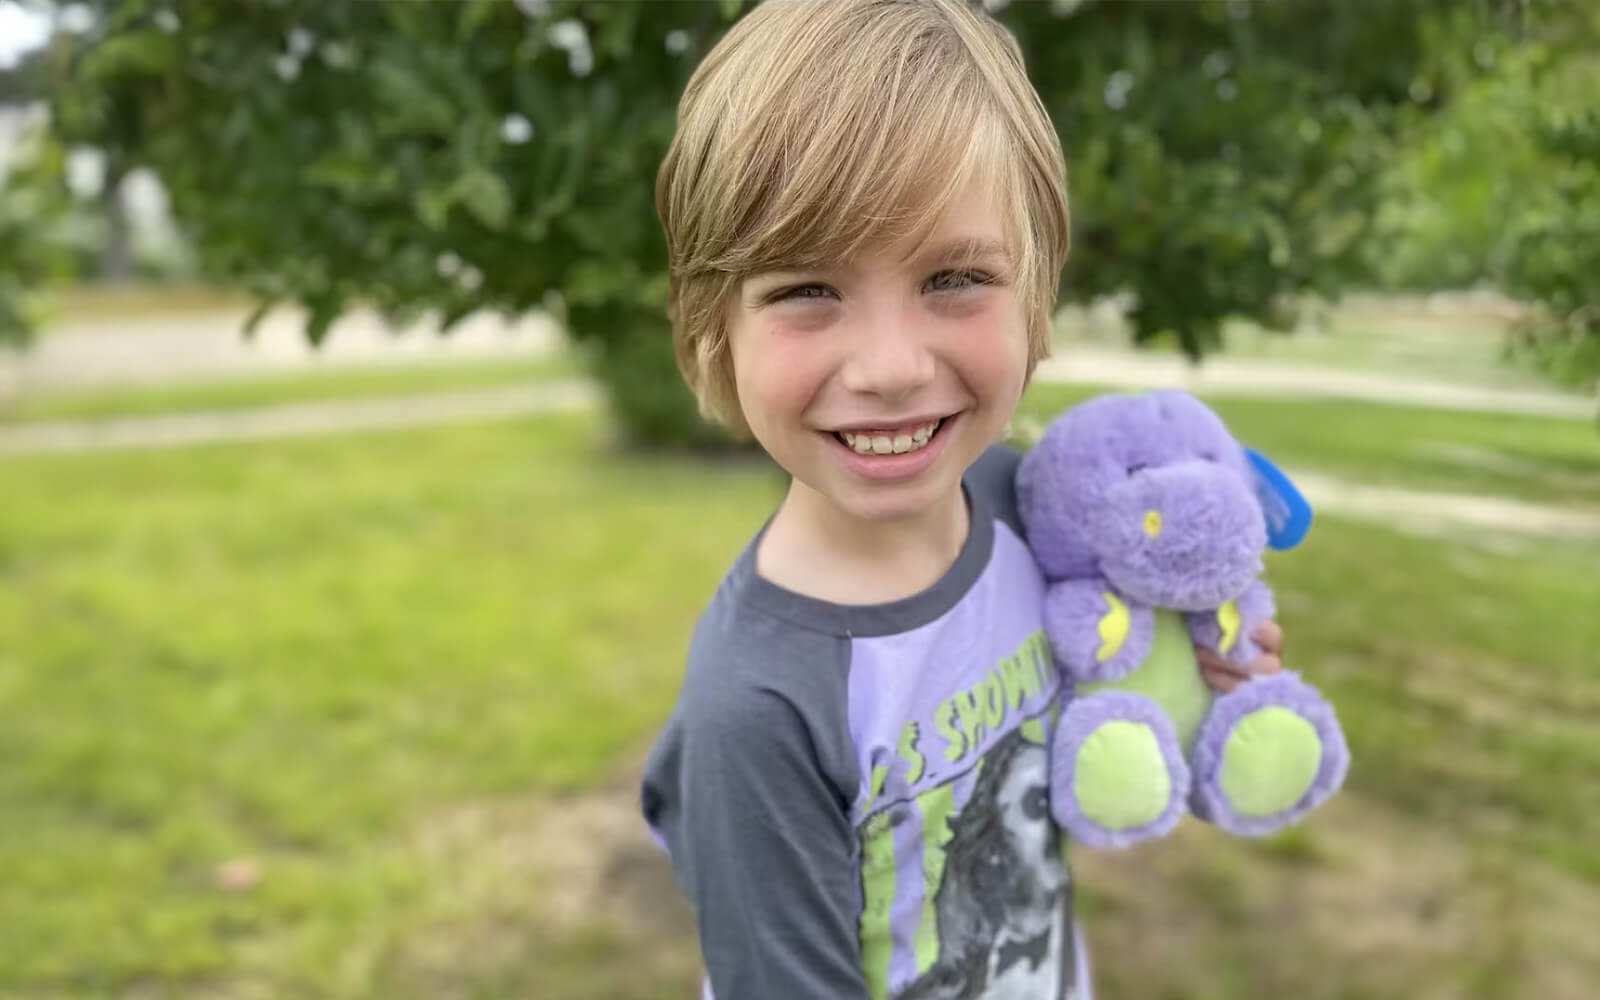 An image of a child smiling holding Dexter the Dinosaur